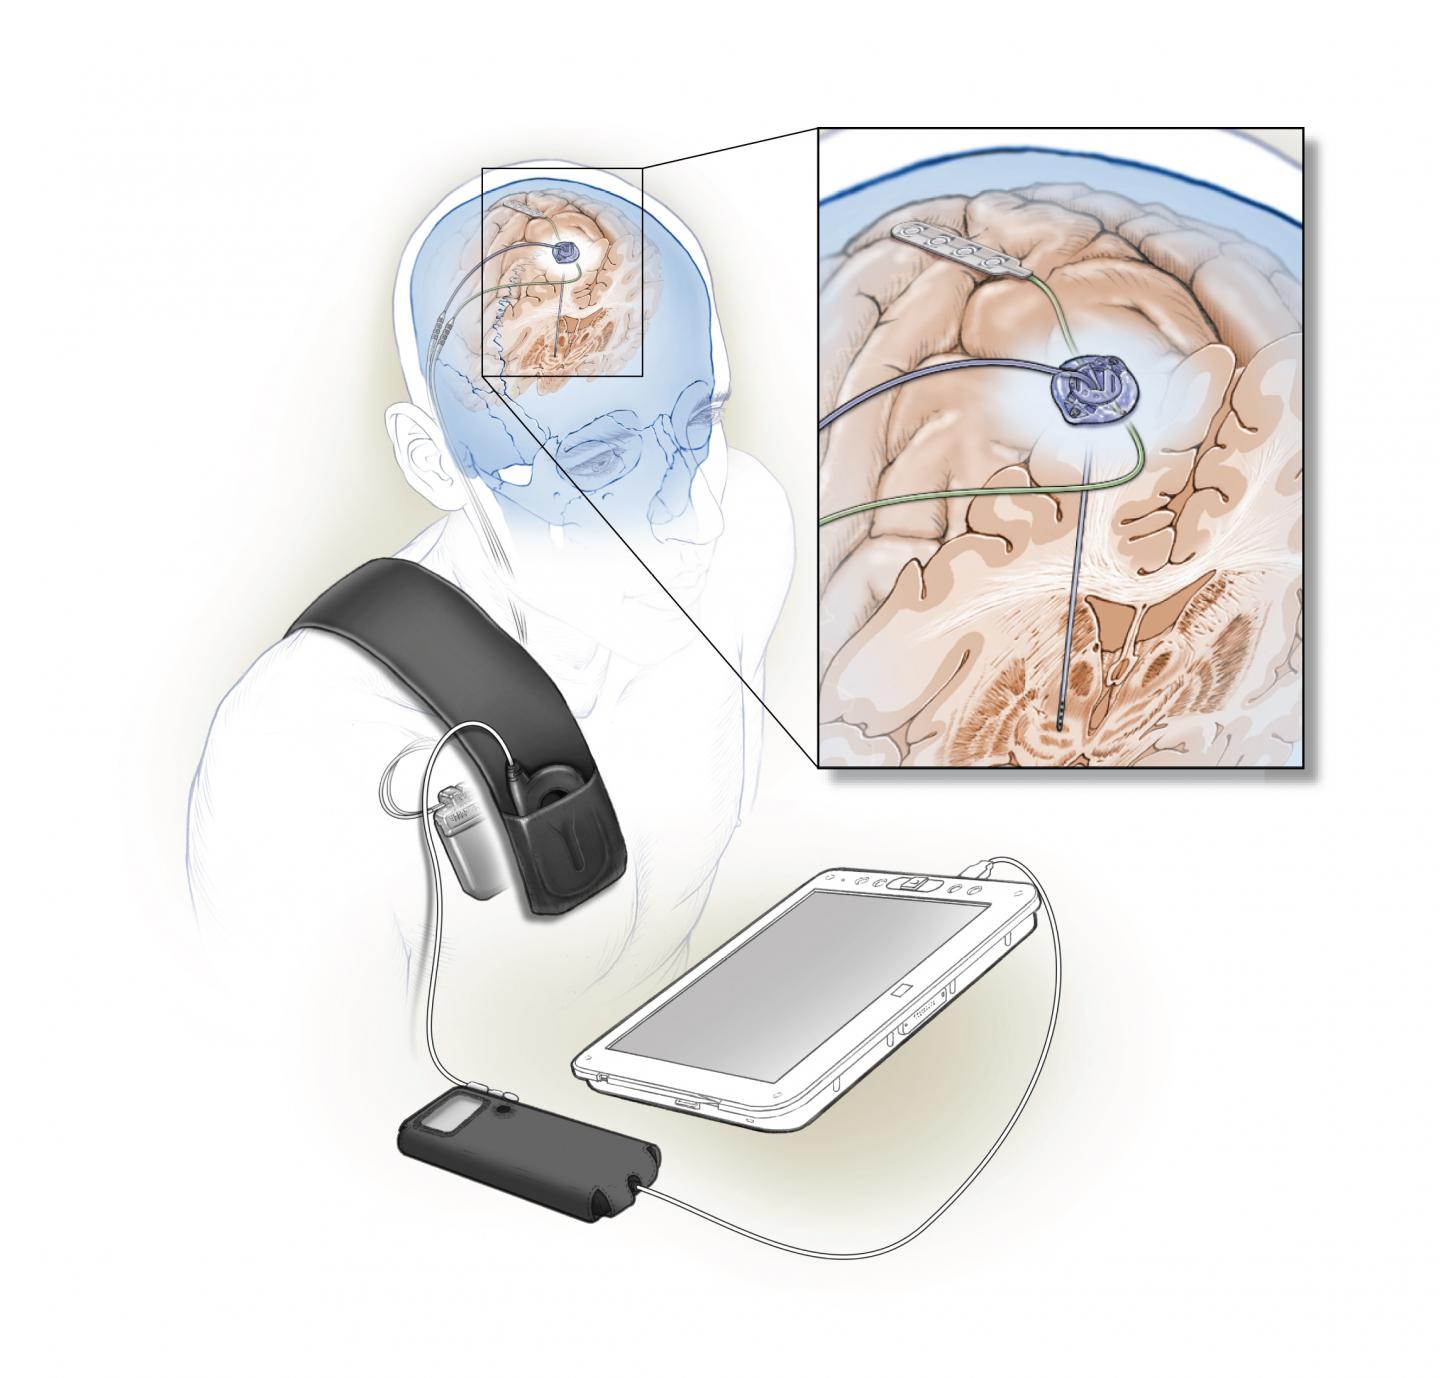 Fully-implanted Adaptive DBS System